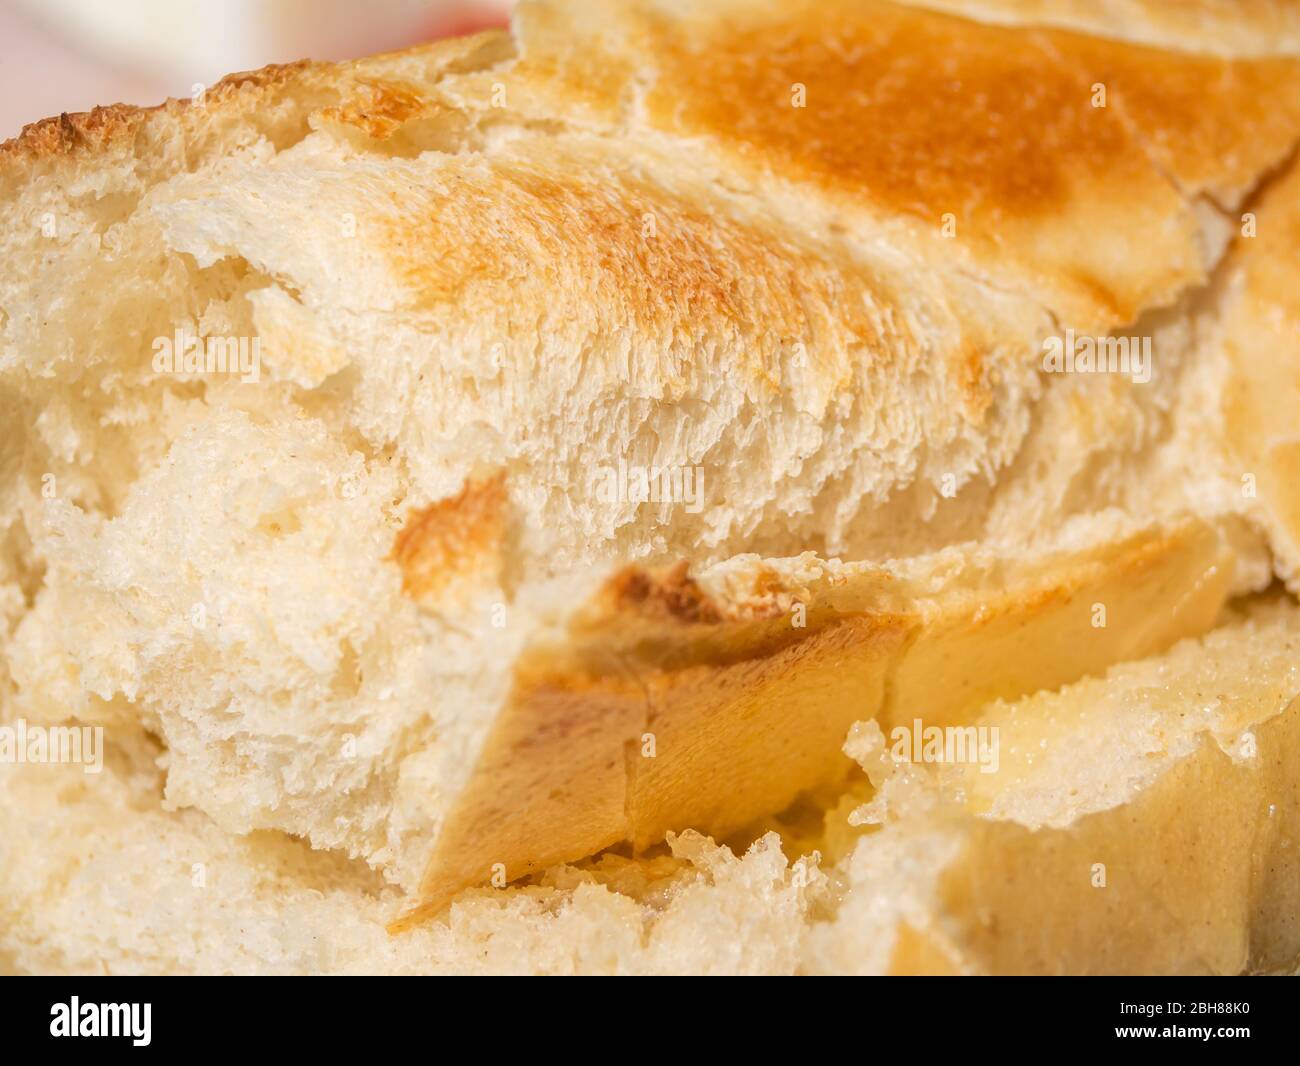 Hot crusty bread broken and ready to eat Stock Photo